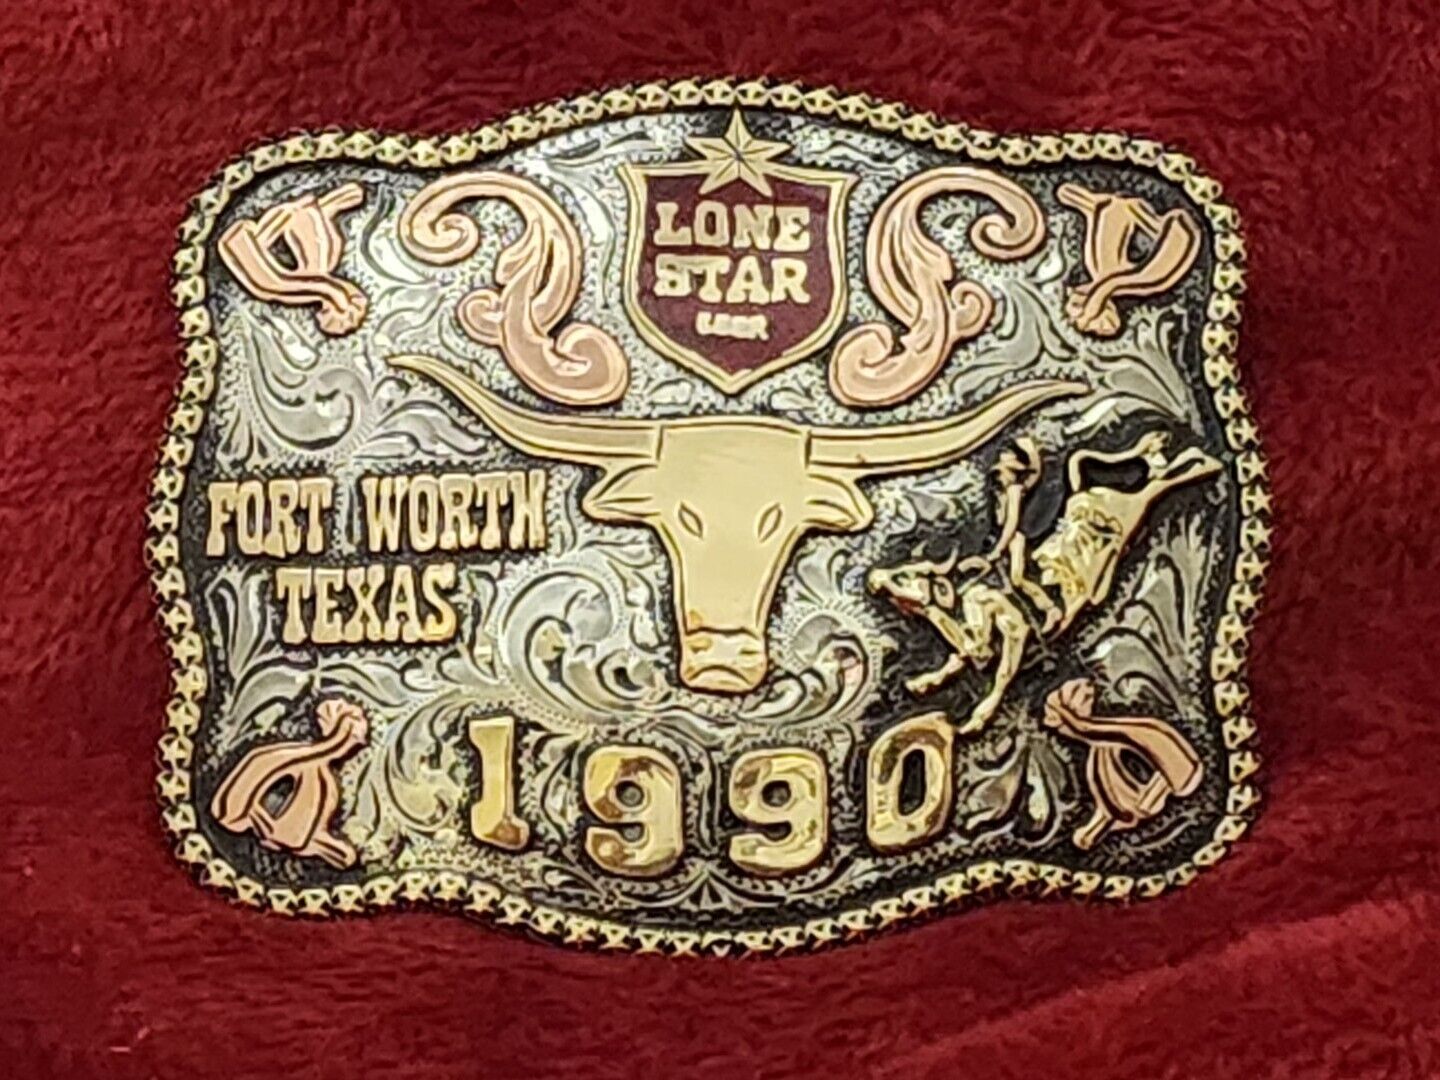 CHAMPION RODEO TROPHY BUCKLE TX LONE STAR BULLRIDING PROFESSIONAL☆1990☆RARE☆20